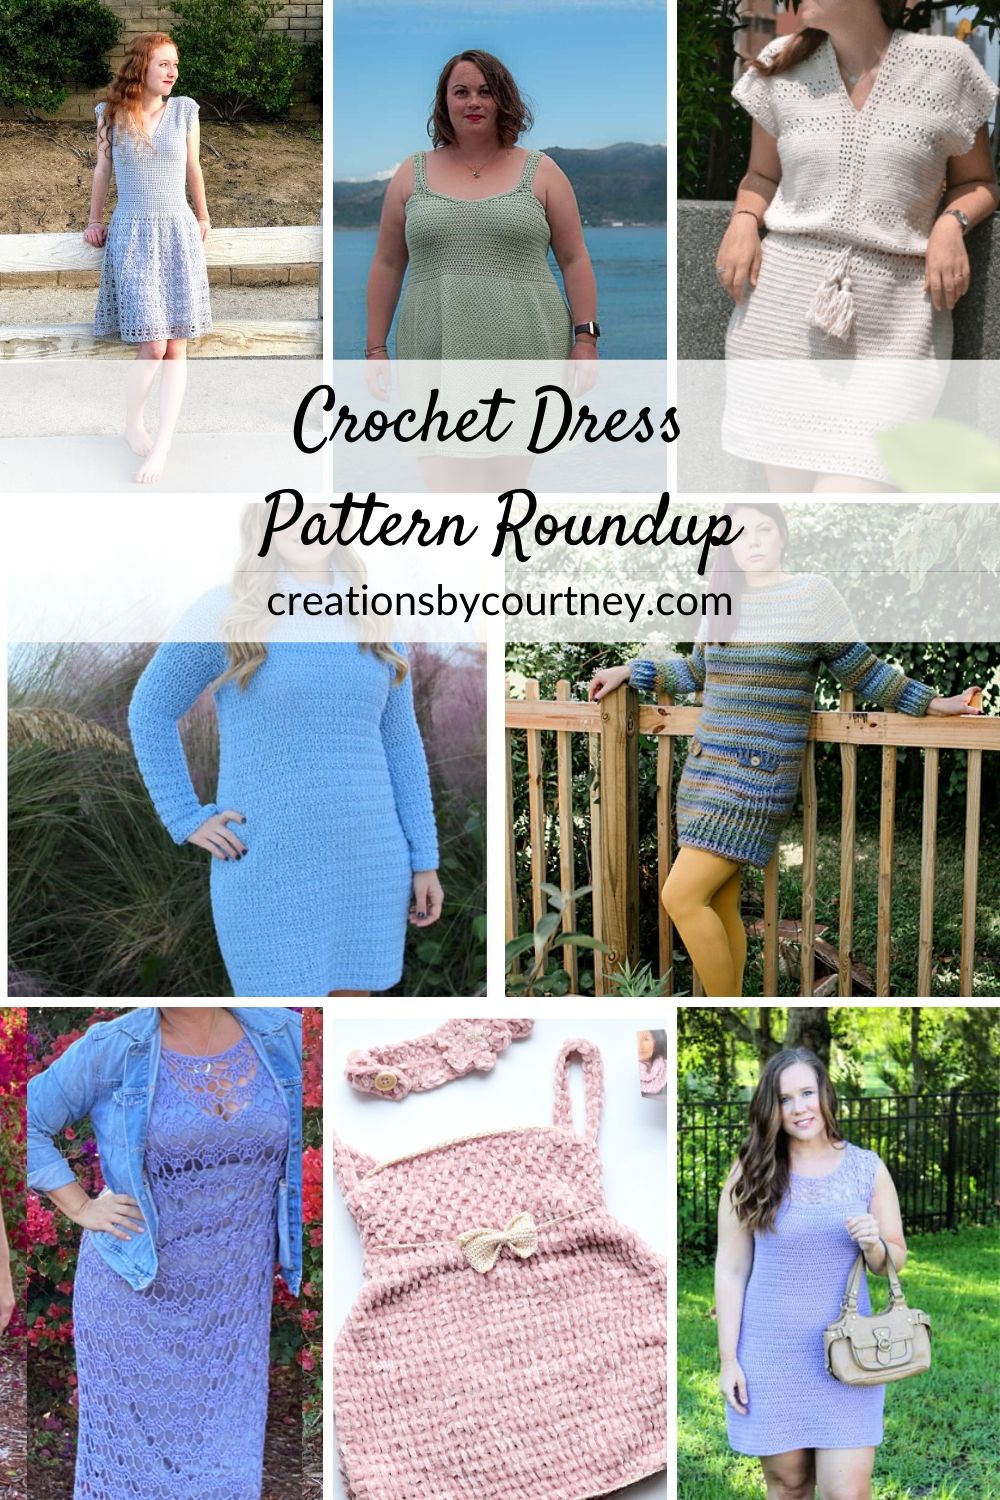 Check out this collection of crochet dress patterns to fit every size and style. From lacy details to tunic styles for cooler weather, and even a tunisian dress for babies. #crochetpatternroundup #crochetpatterns #crochetgarment #crochetdress